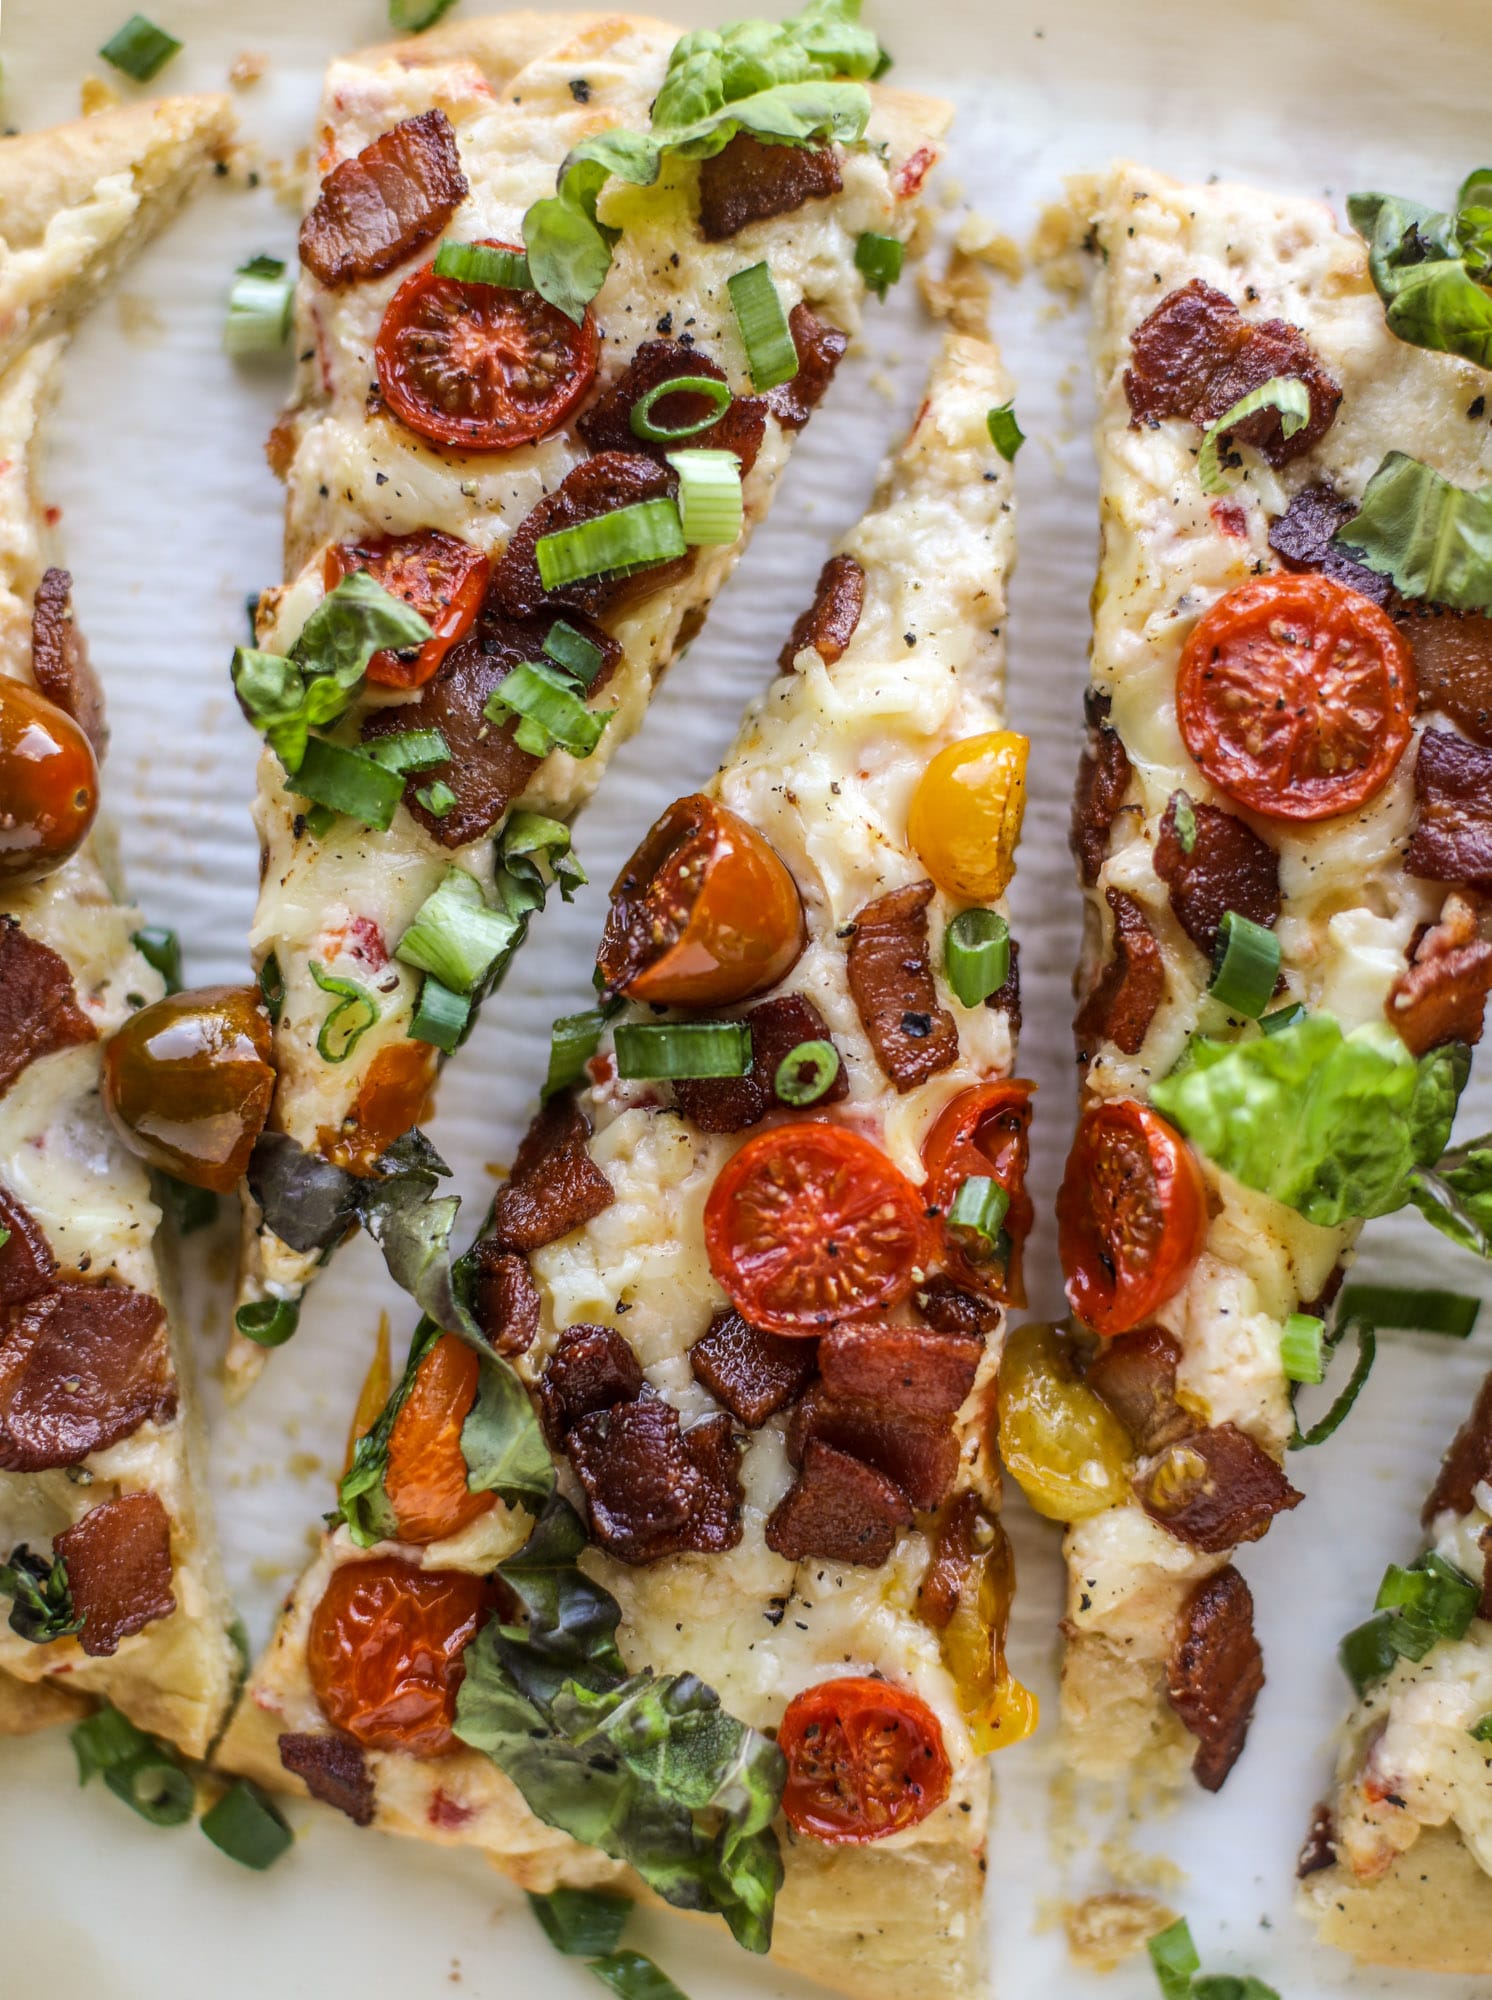 A crisped flatbread crust is topped with creamy pimento cheese, crispy bacon, garlic burst tomatoes and shredded lettuce. It's a flavor explosion!